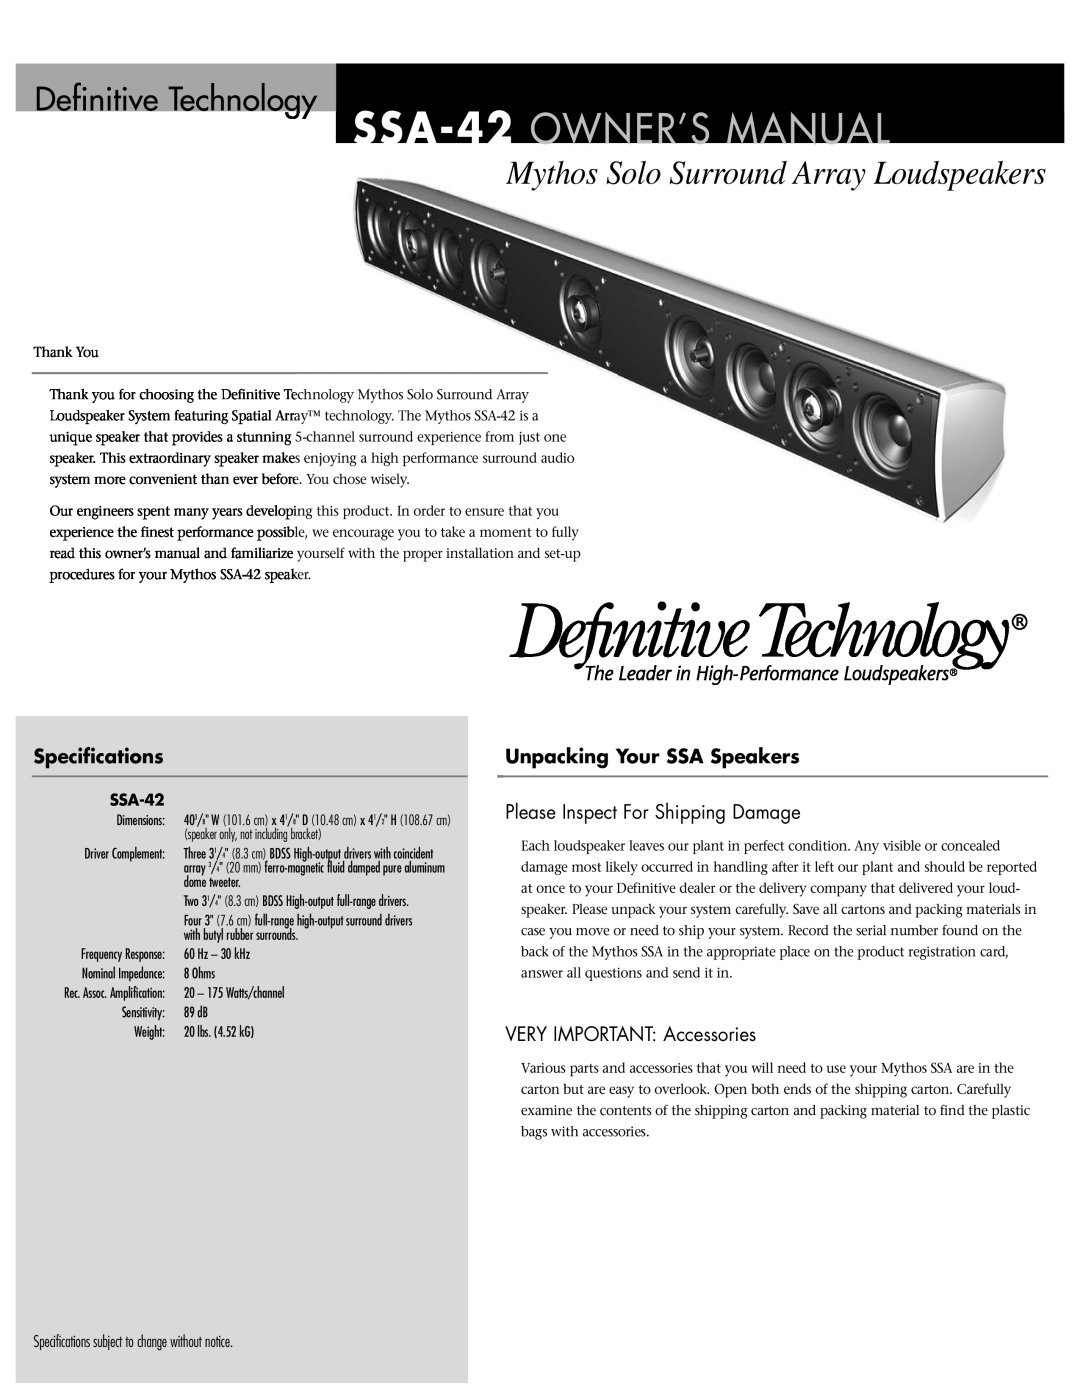 Definitive Technology SSA-42 specifications Specifications, Unpacking Your SSA Speakers, VERY IMPORTANT Accessories 